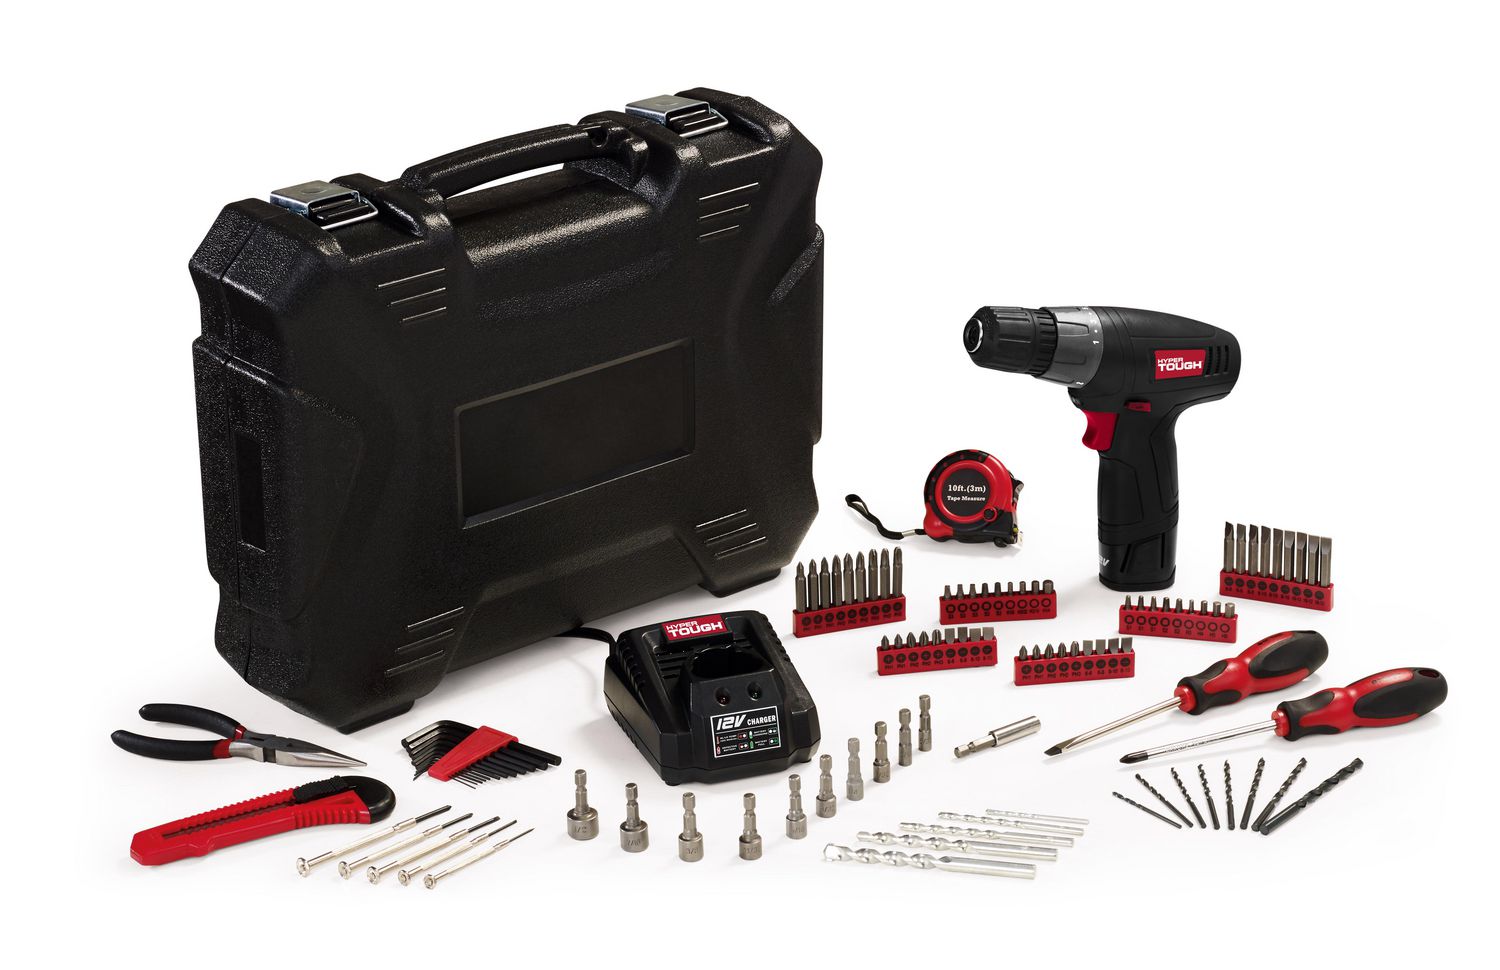 Hyper Tough 12-Volt Lithium-Ion Cordless Drill/Driver with 100 pieces  Project Kit 